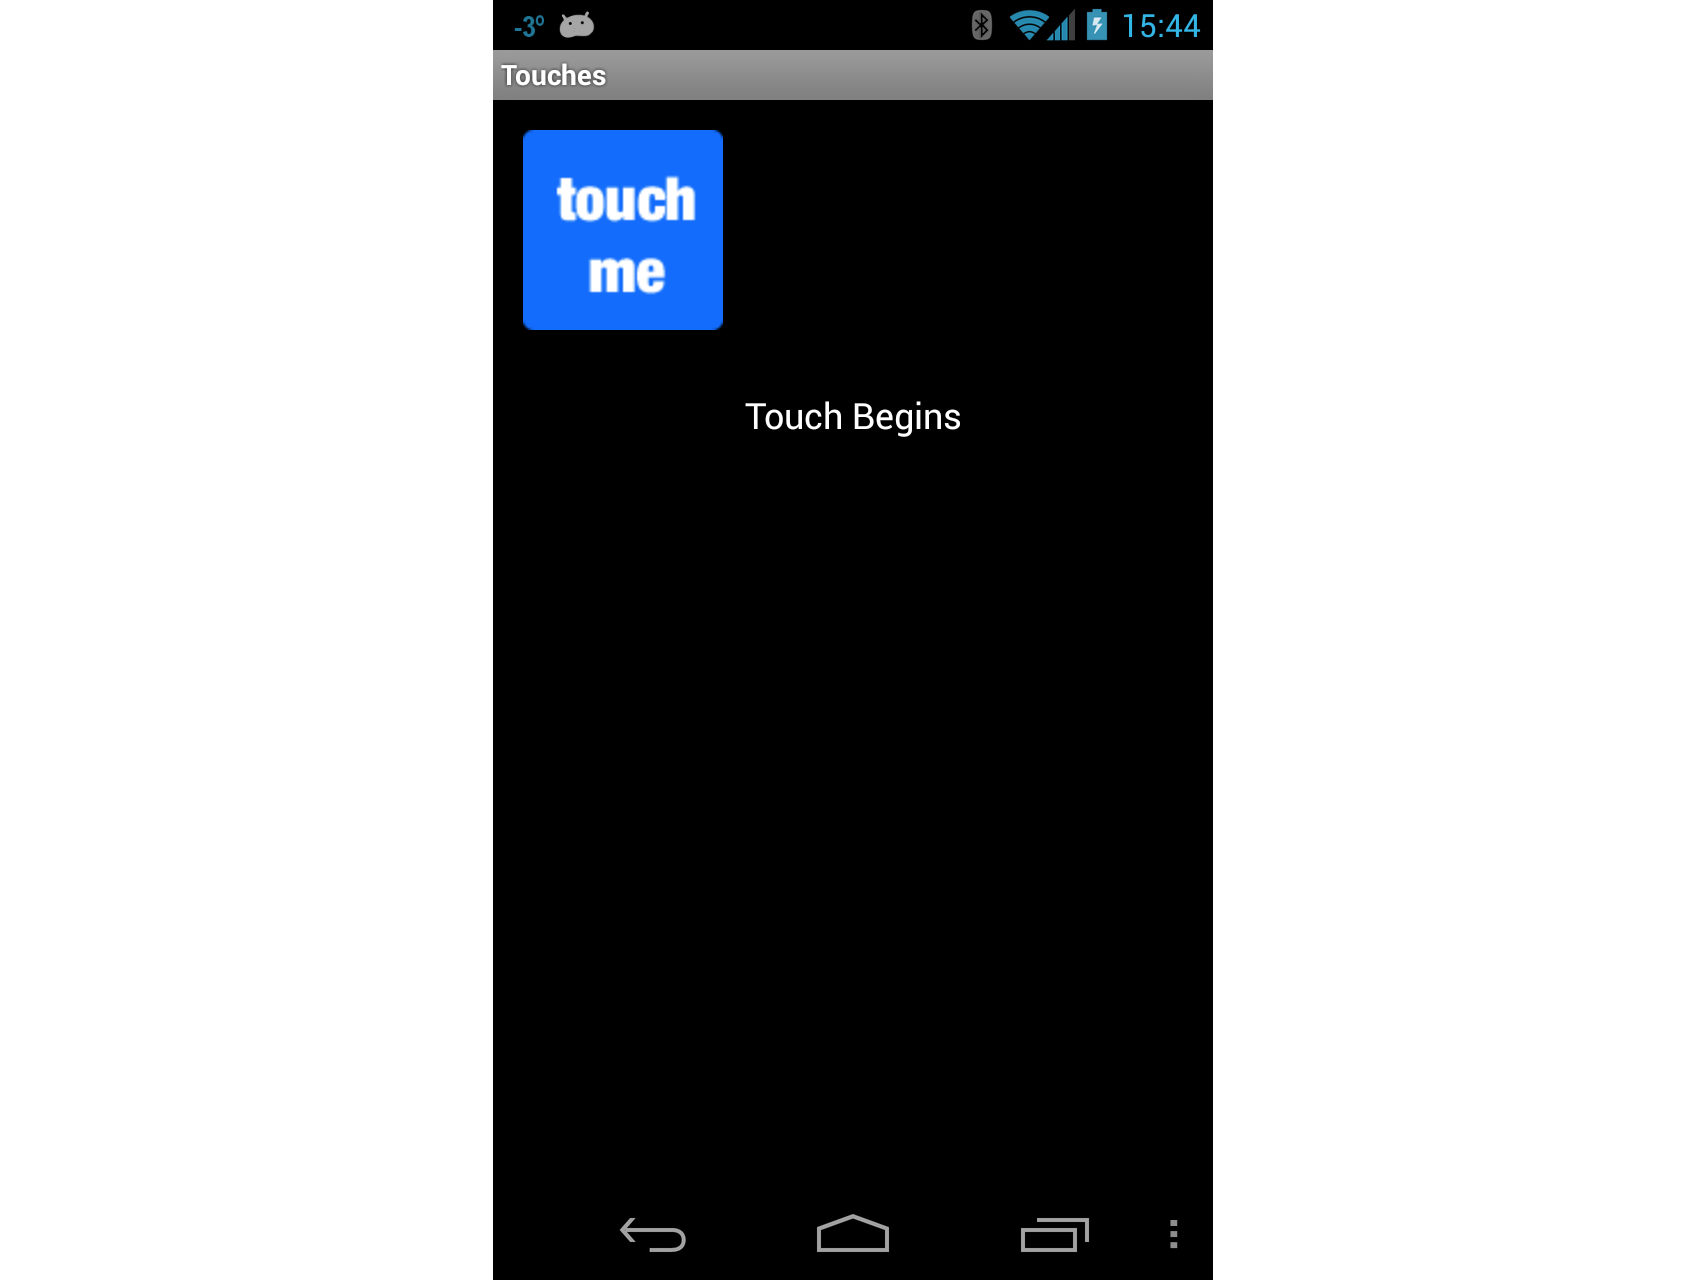 Screenshot of activity with Touch Begins displayed